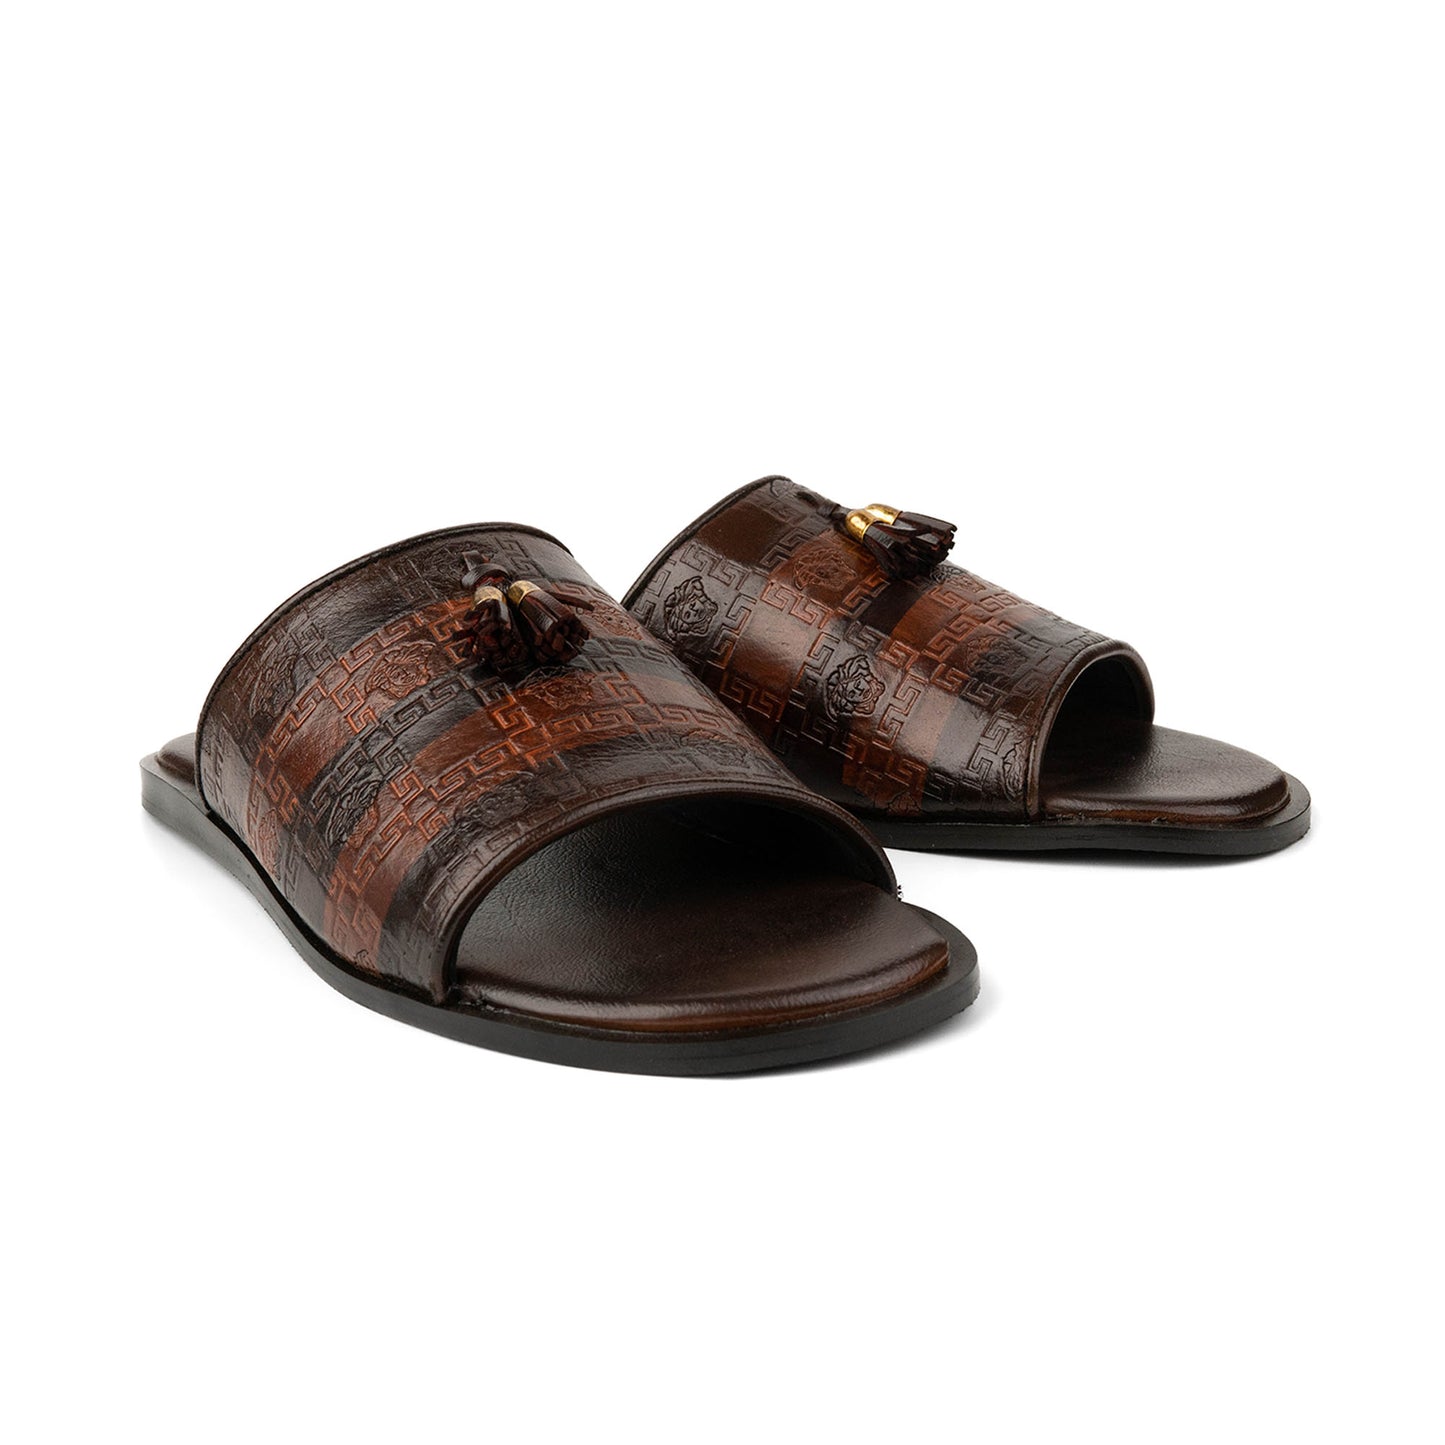 Twin Tussle Premium Leather Slippers